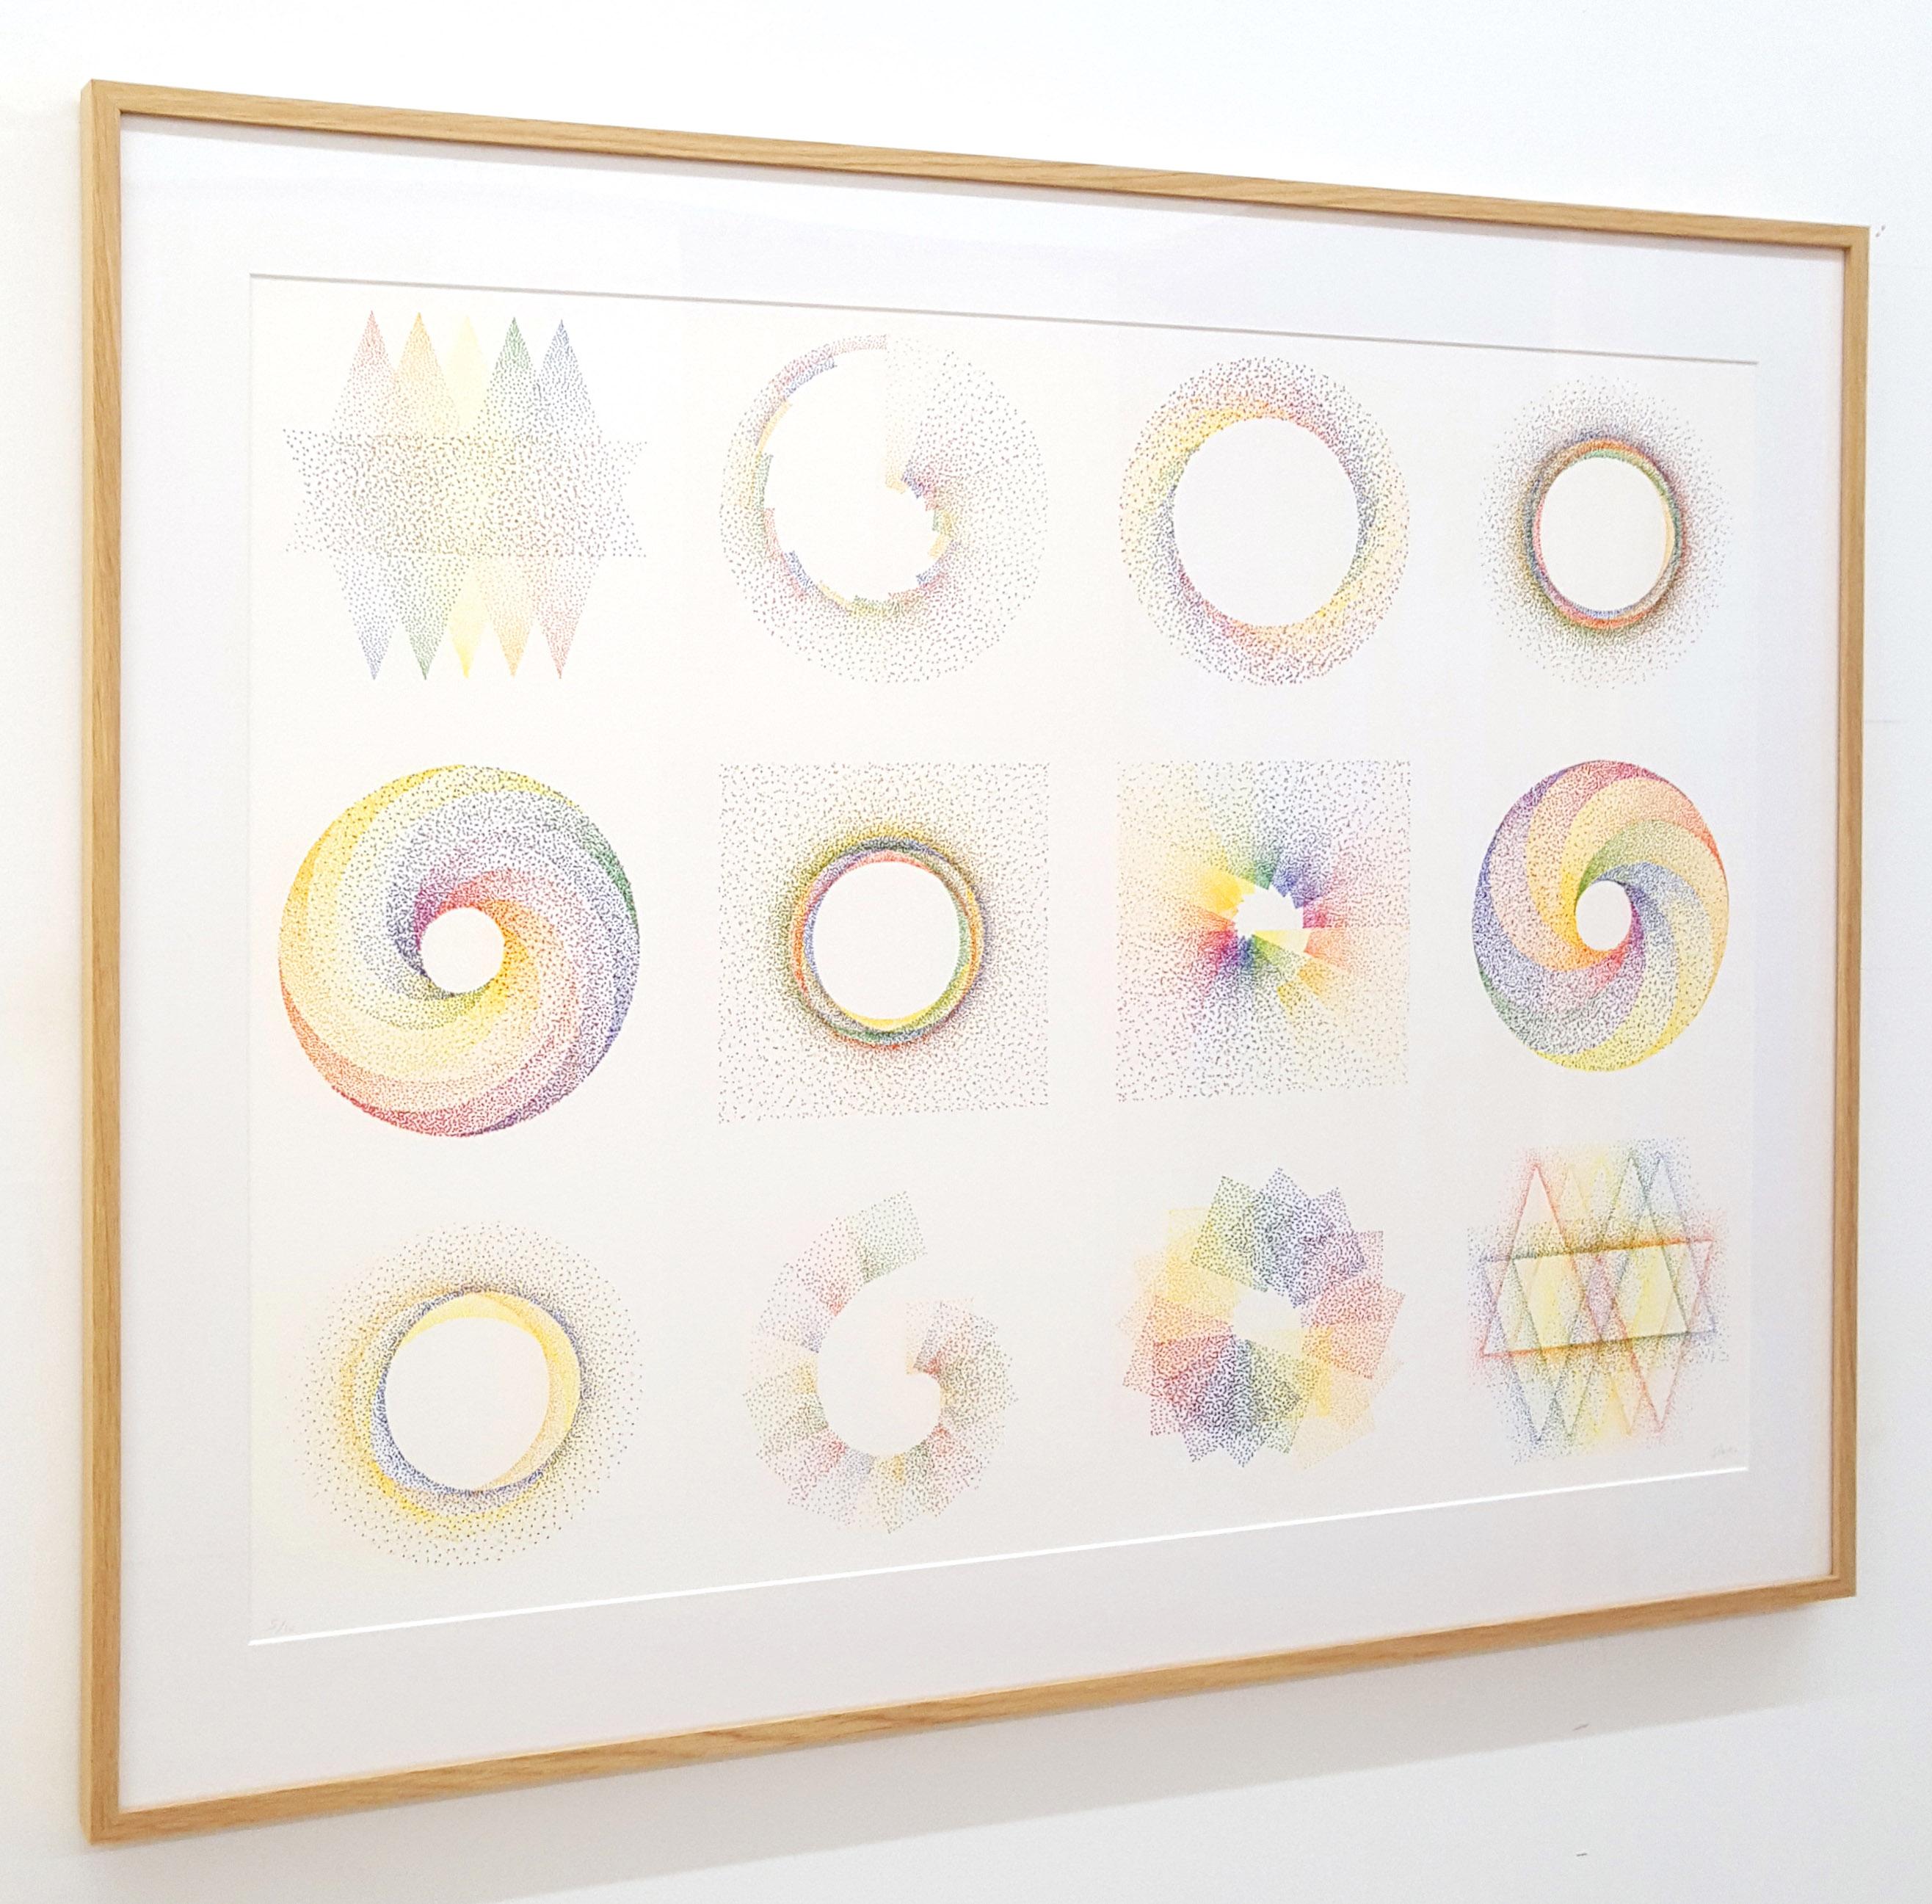 Signed and numbered art print by Julio Le Parc including all the 